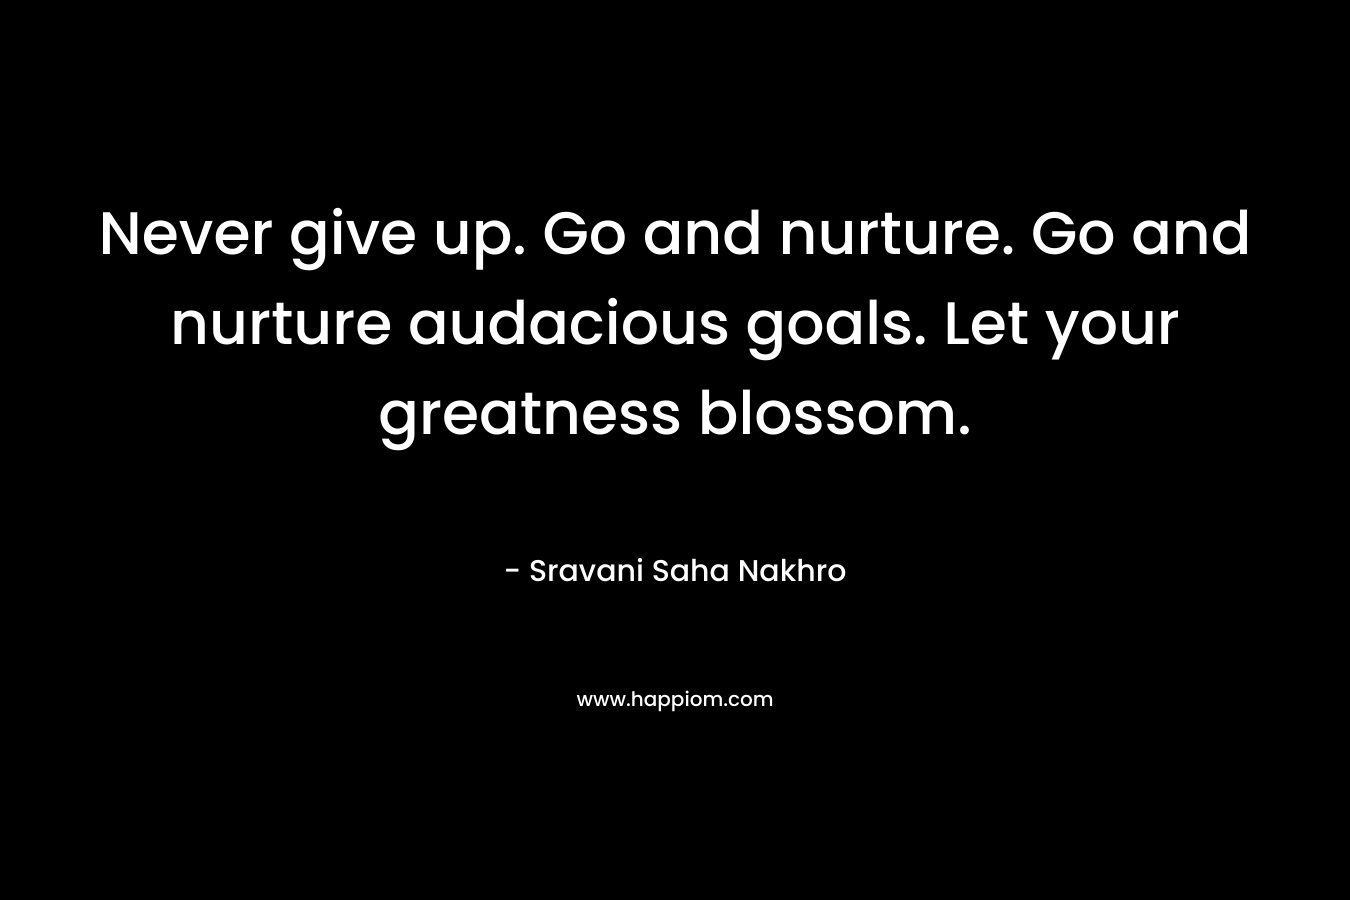 Never give up. Go and nurture. Go and nurture audacious goals. Let your greatness blossom.